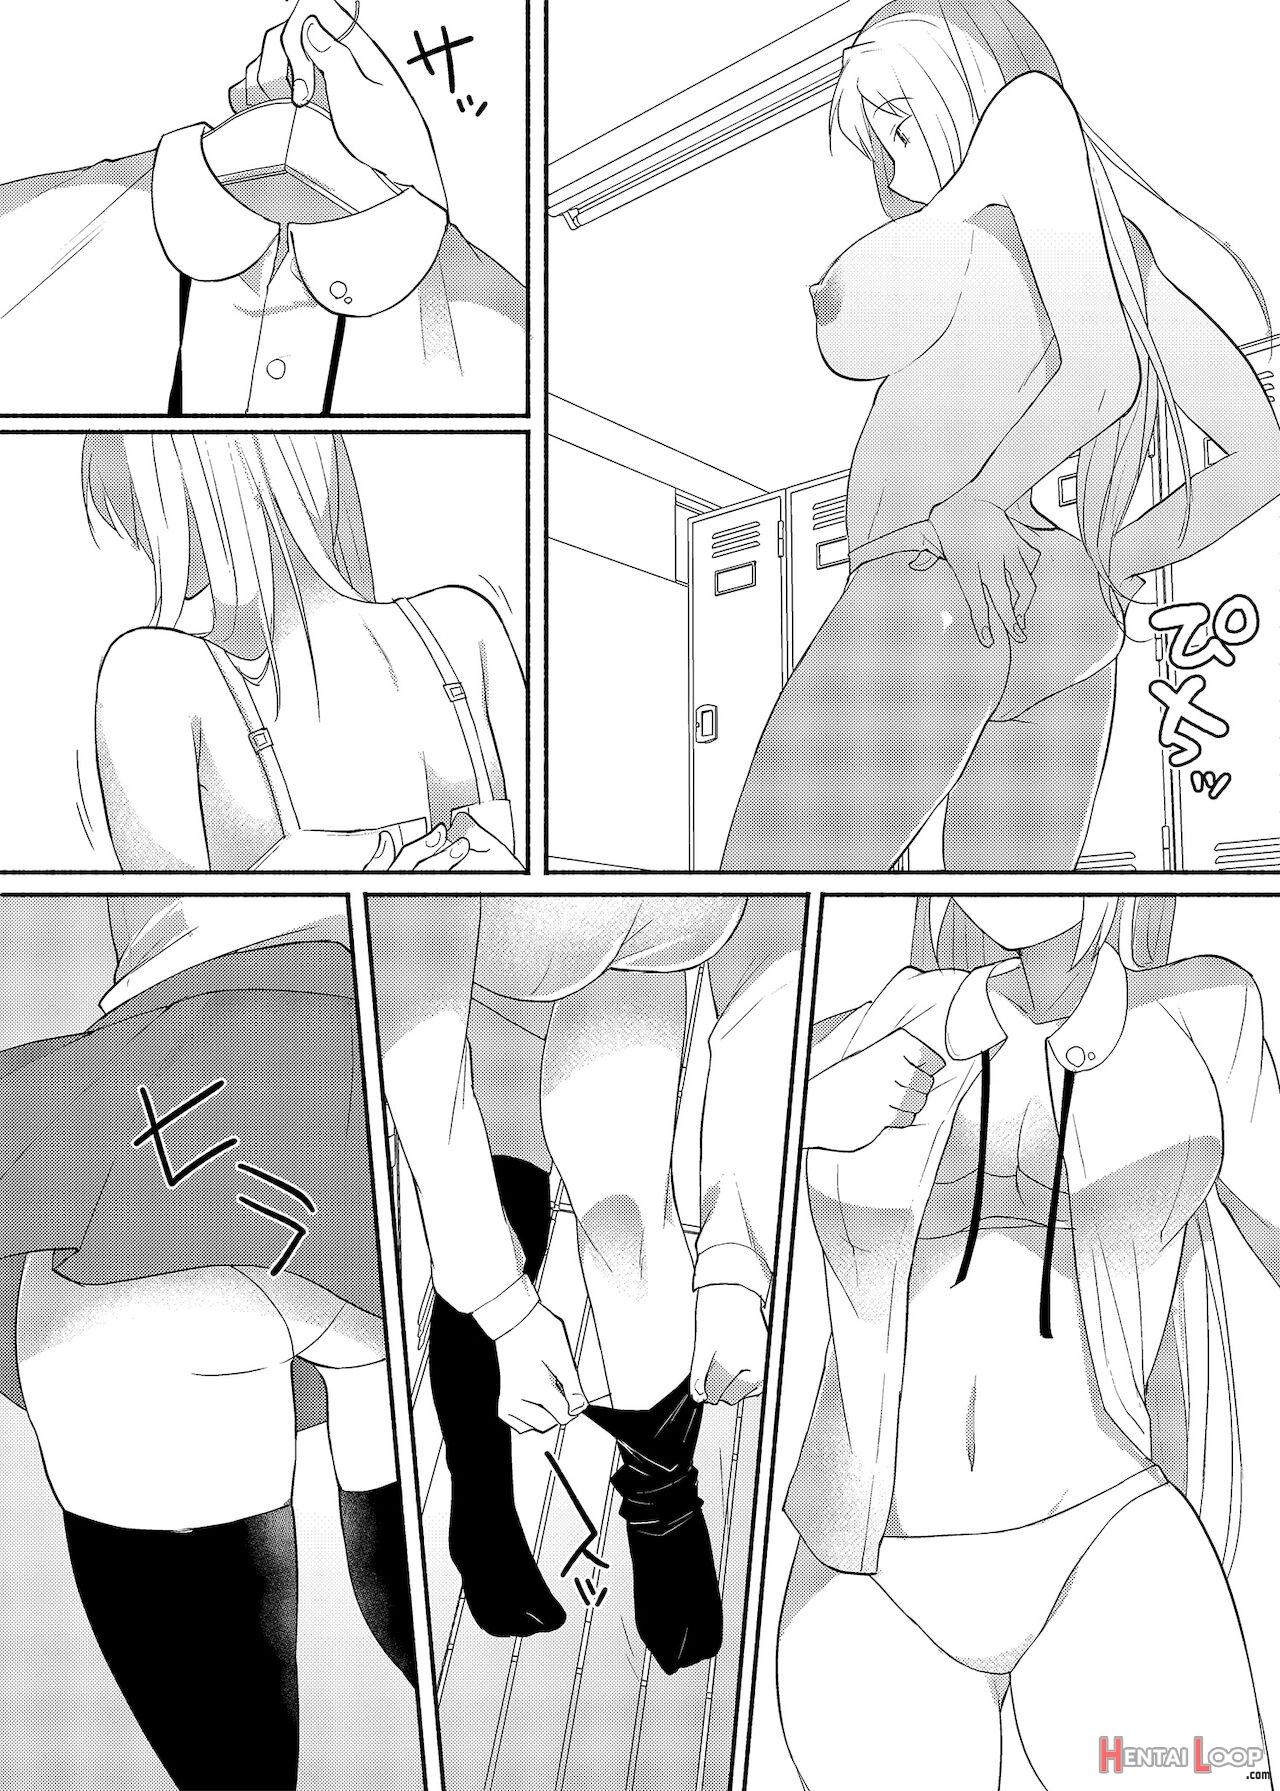 Crossdressing Fetish Gone Out Of Hand page 16